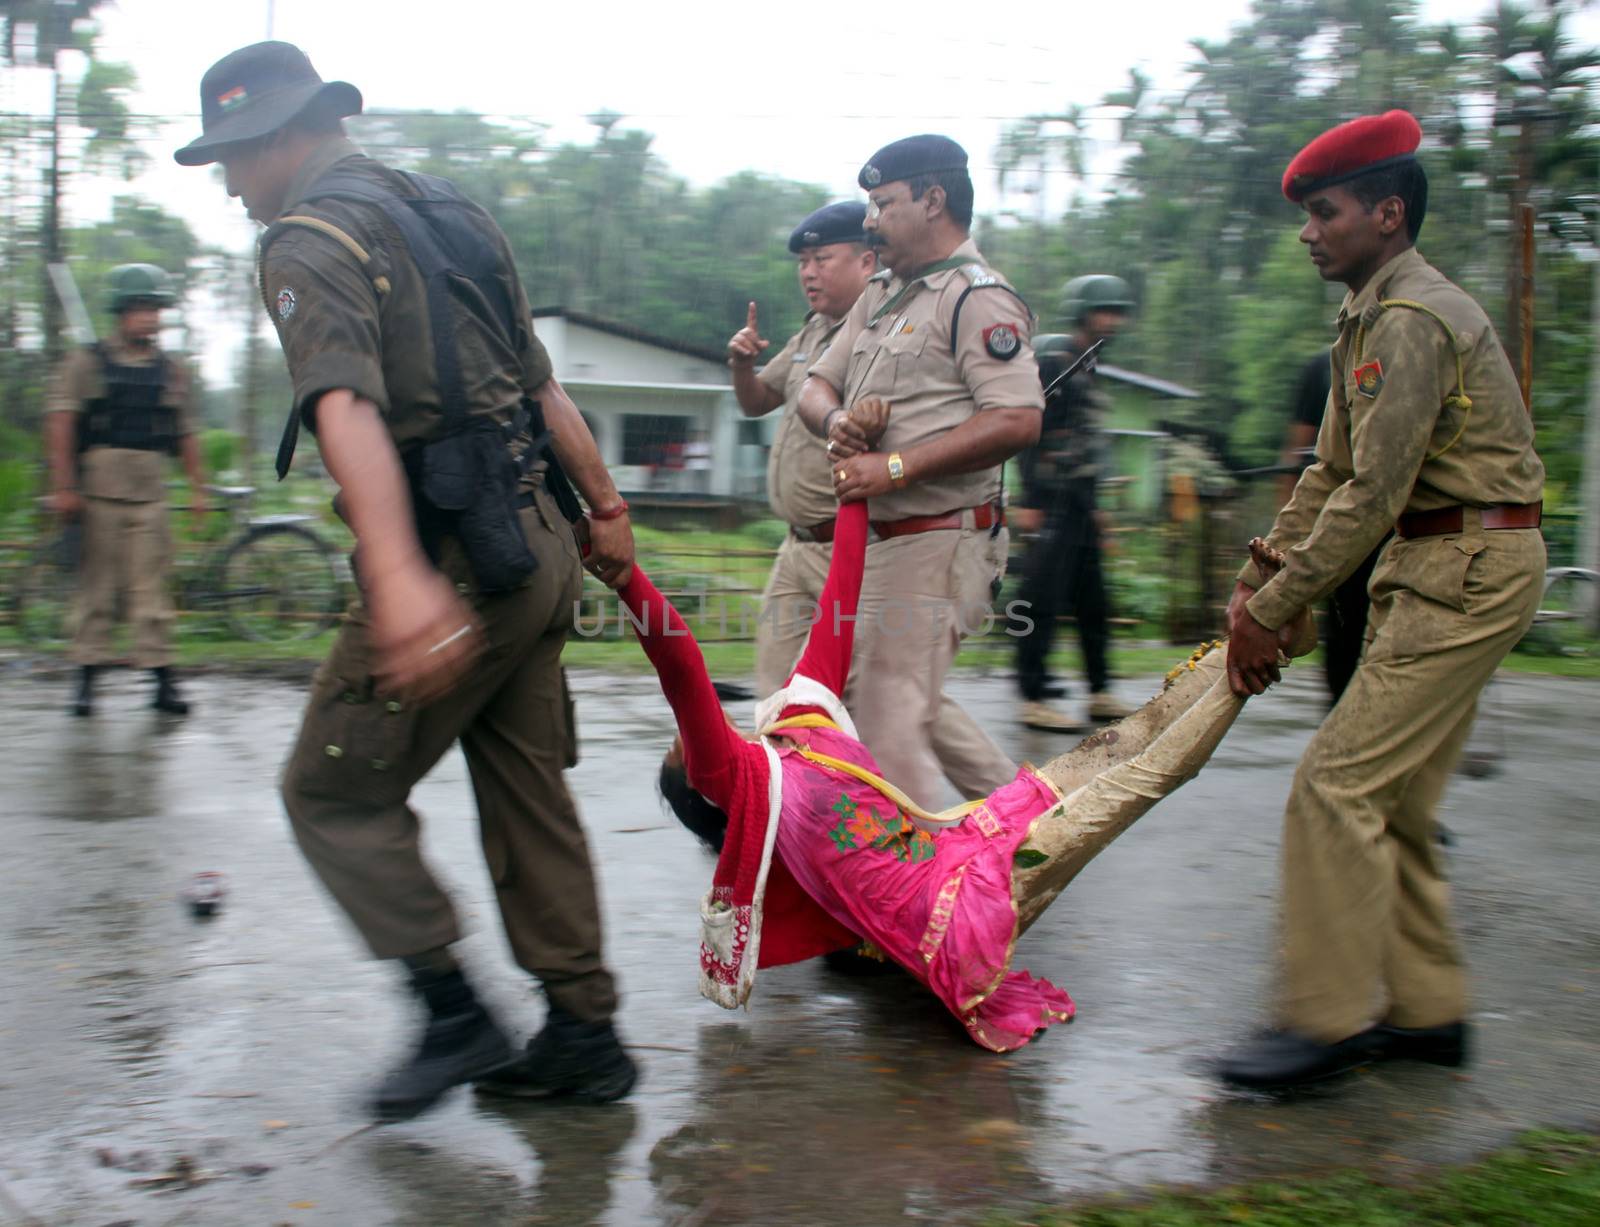 INDIA, Tinsukia: [WARNING: graphic content] Officers carry a woman's body after a protest where at least eleven people were killed, and twelve others injured, when a high-voltage electric cable was hit by stray police fire and fell on protesters in Tinsukia, Assam, India on April 11, 2016. Protesters had reportedly stormed a police station, calling on police to hand over a group of suspects arrested for killing two people last week. Police opened fire to disperse protesters, and a stray bullet severed the power line, which fell and electrocuted demonstrators.